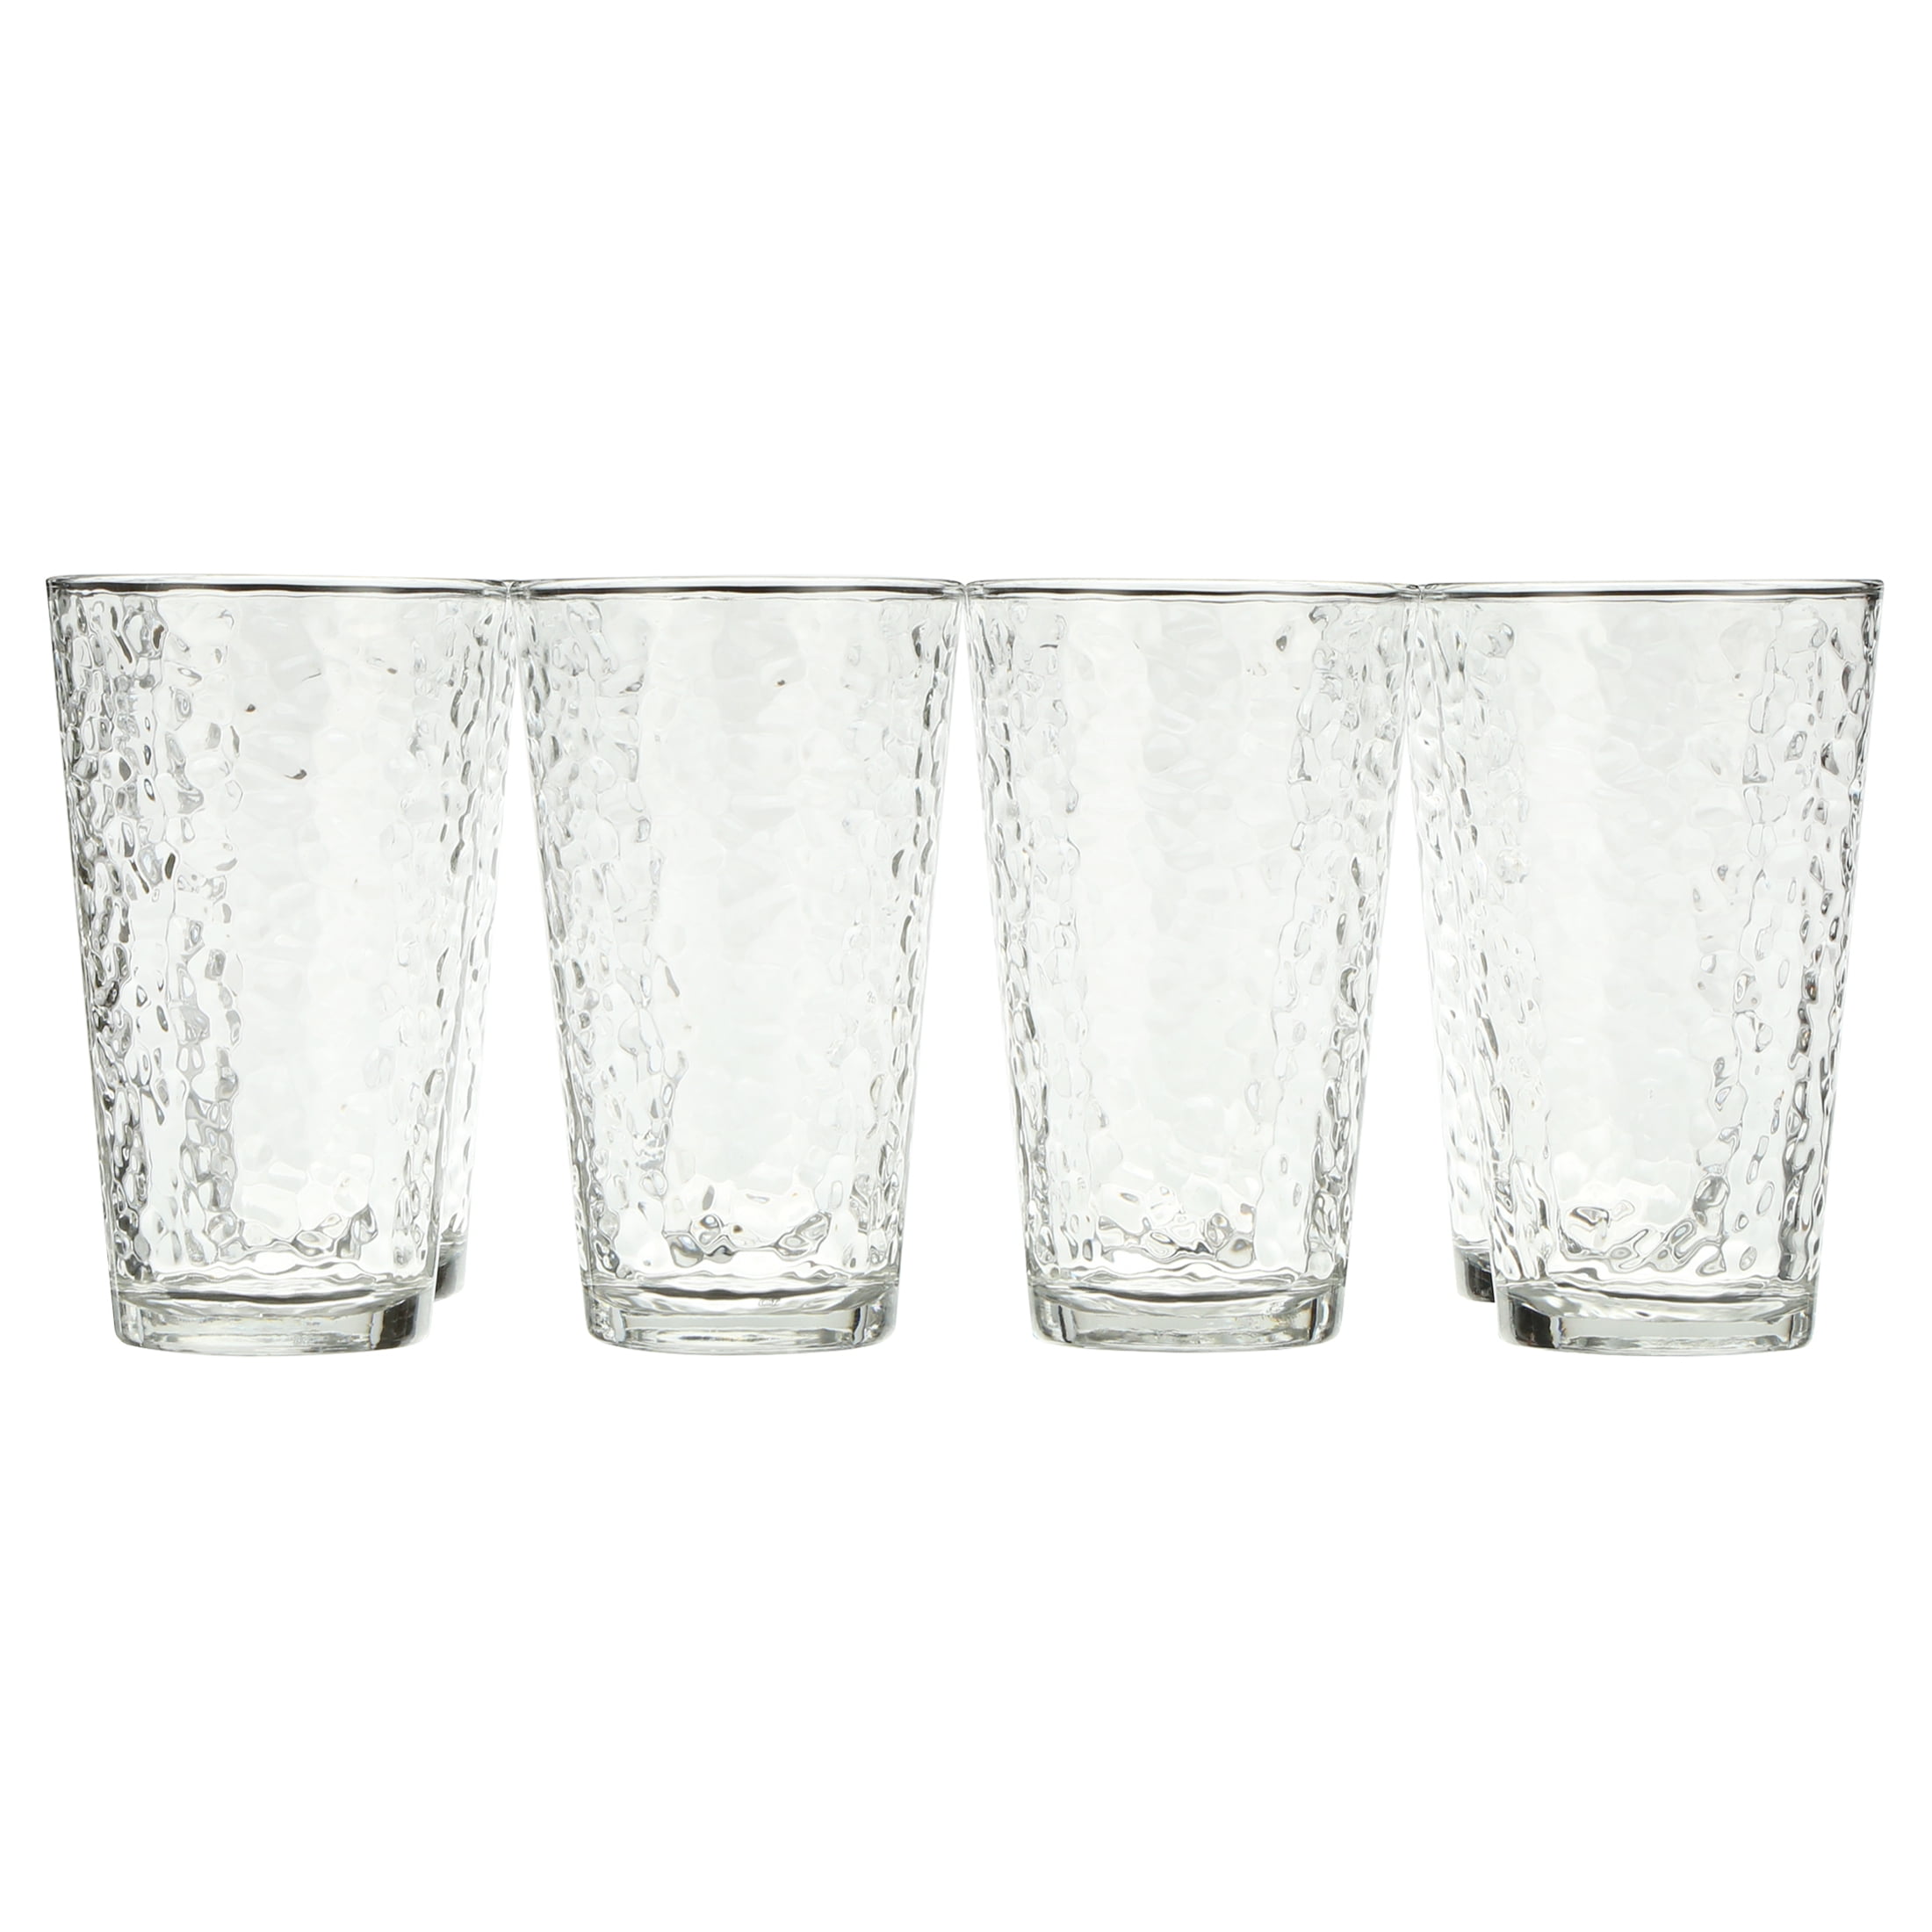 Libbey Cabos Glassware Set - 8 Piece - Clear, 16 oz - Fry's Food Stores